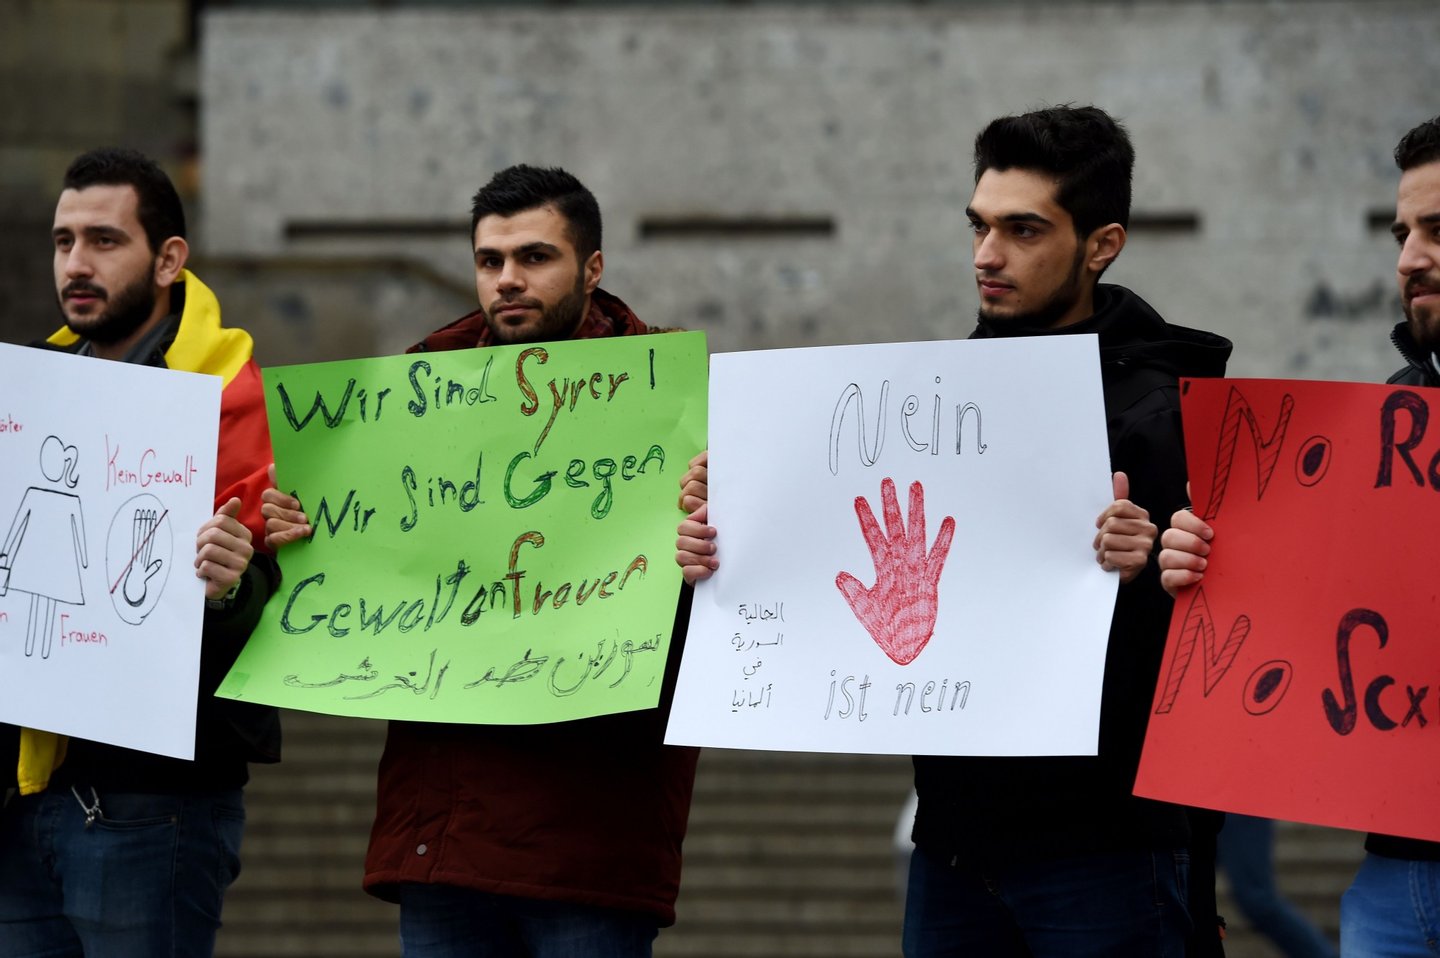 Refugees from Syria hold a sign reading "we are syrians-we are against violence against women" as they demonstrate against violence at the Cologne main train station in Cologne, western Germany on January 16, 2016 where violence against women were perpetrated on New Year's Eve. / AFP / PATRIK STOLLARZ (Photo credit should read PATRIK STOLLARZ/AFP/Getty Images)